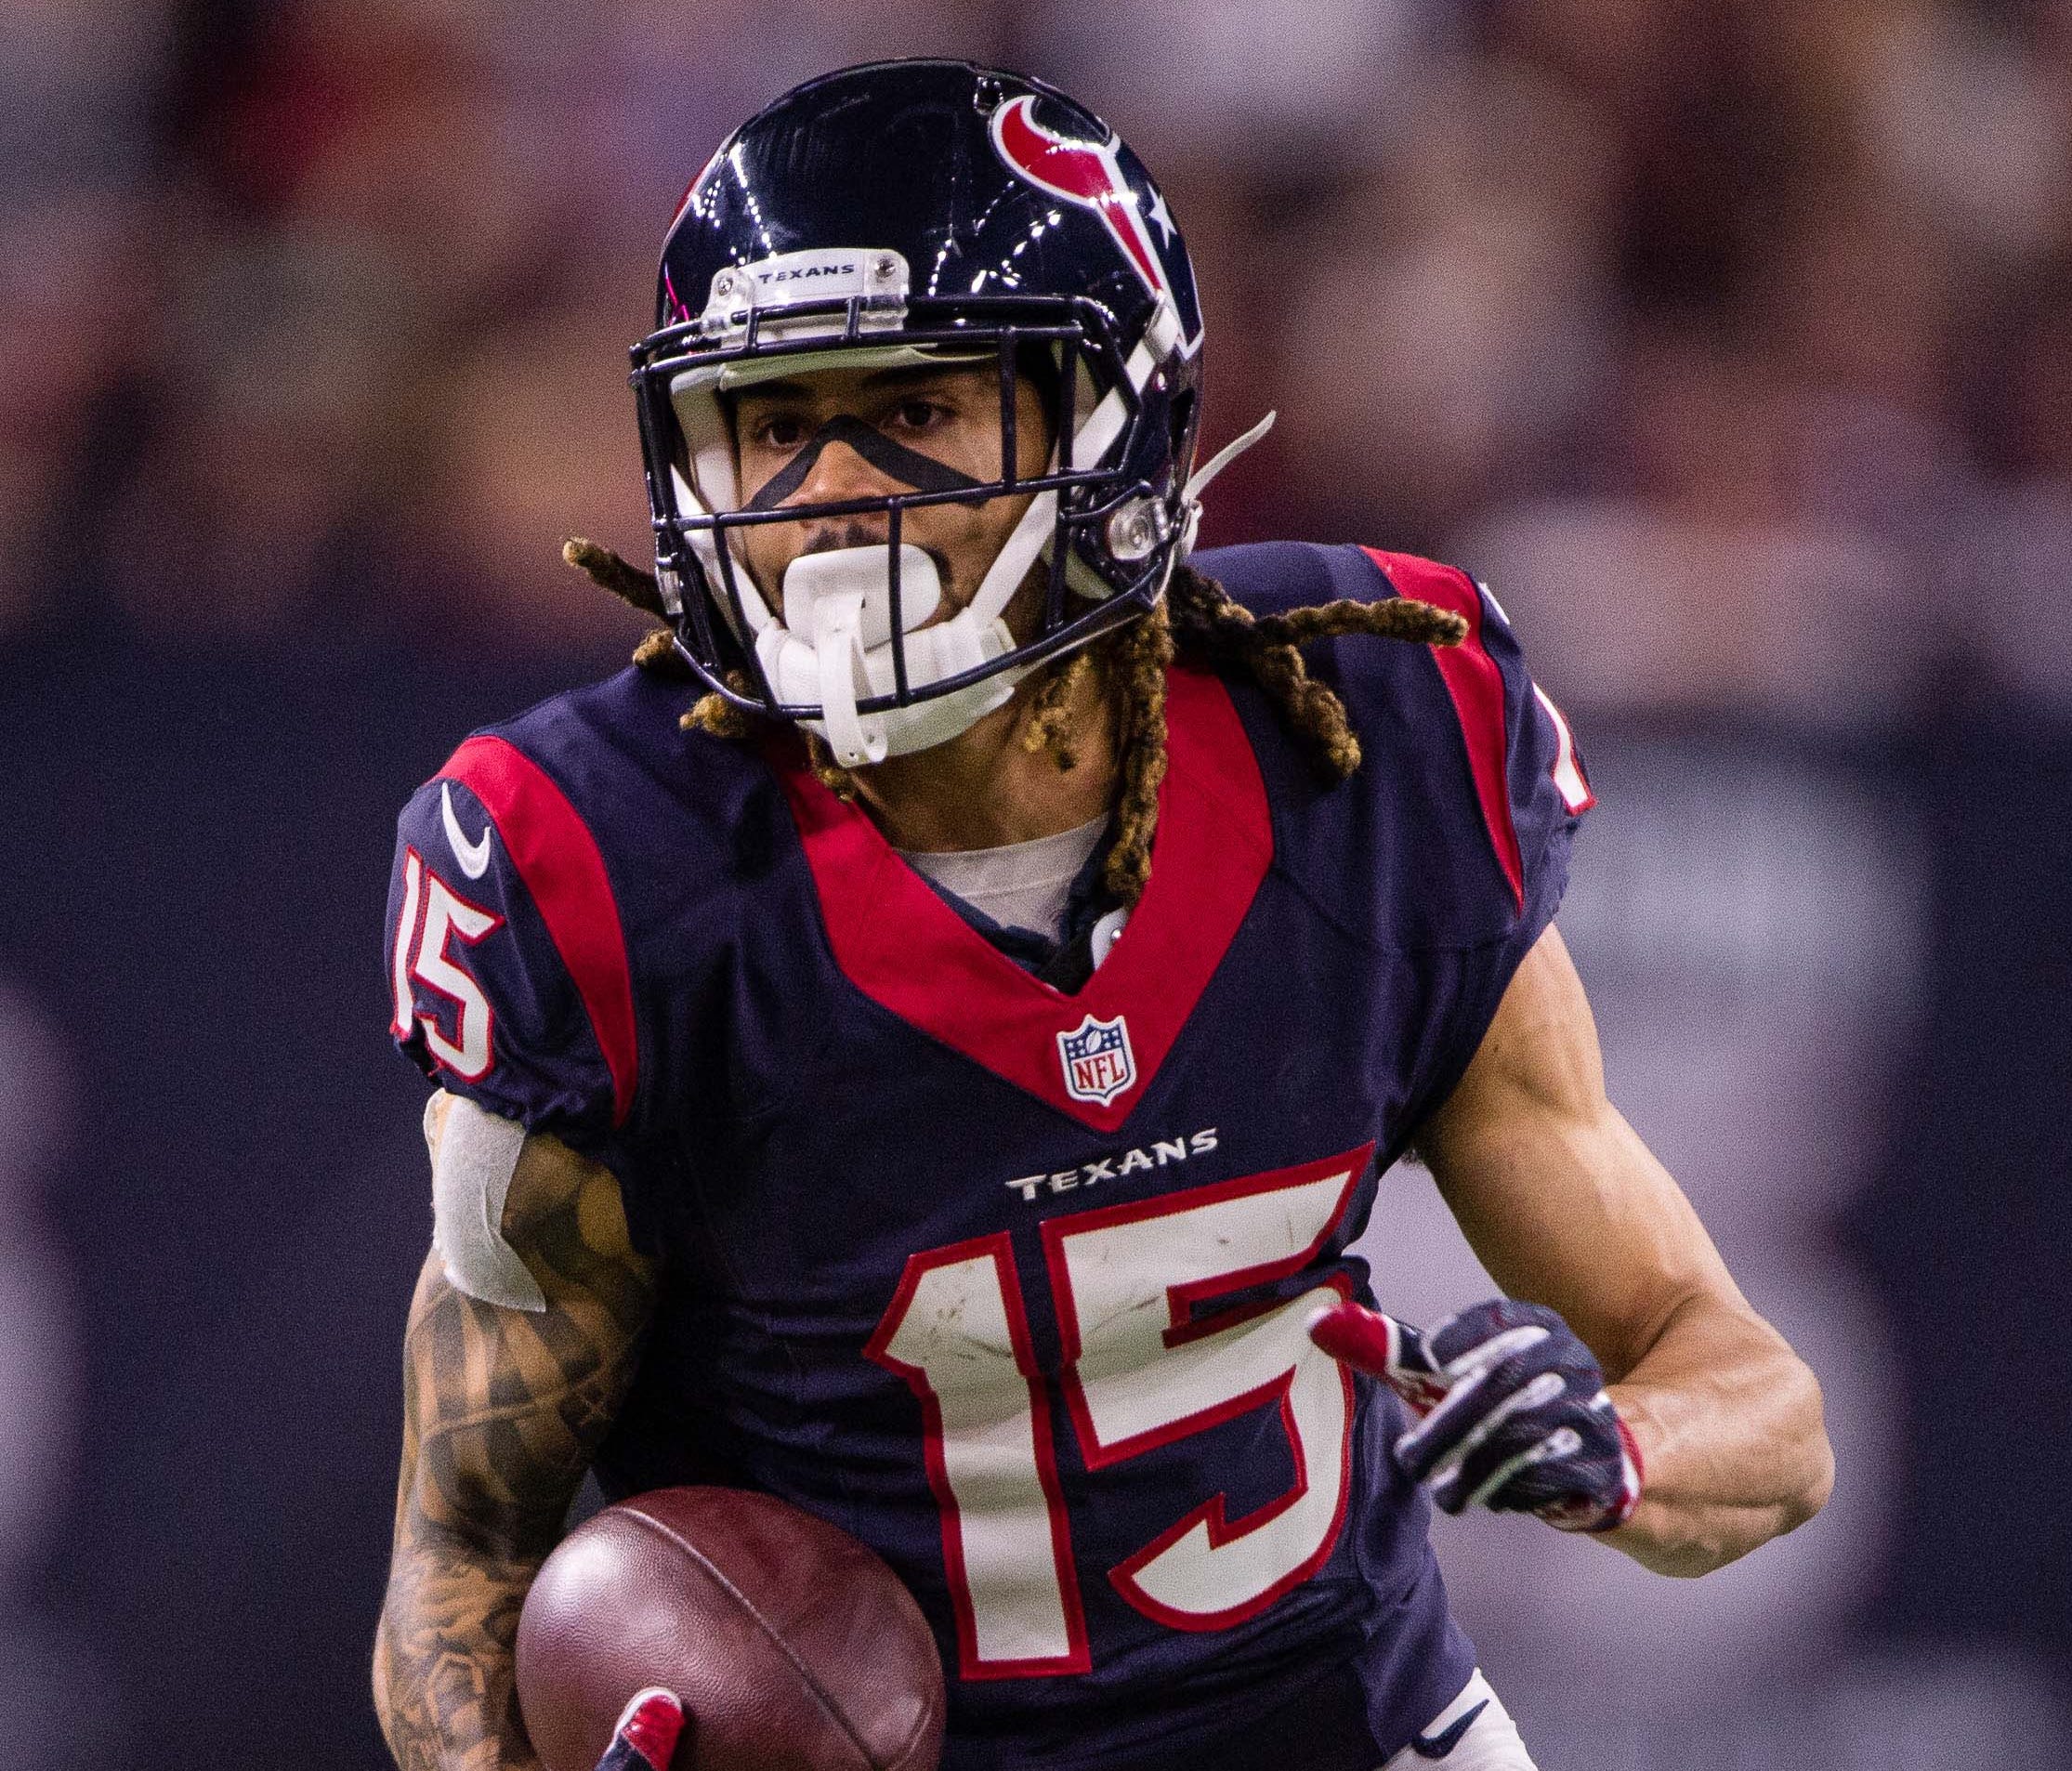 Houston Texans wide receiver Will Fuller (15) in action against the Oakland Raiders during the AFC Wild Card playoff football game at NRG Stadium.